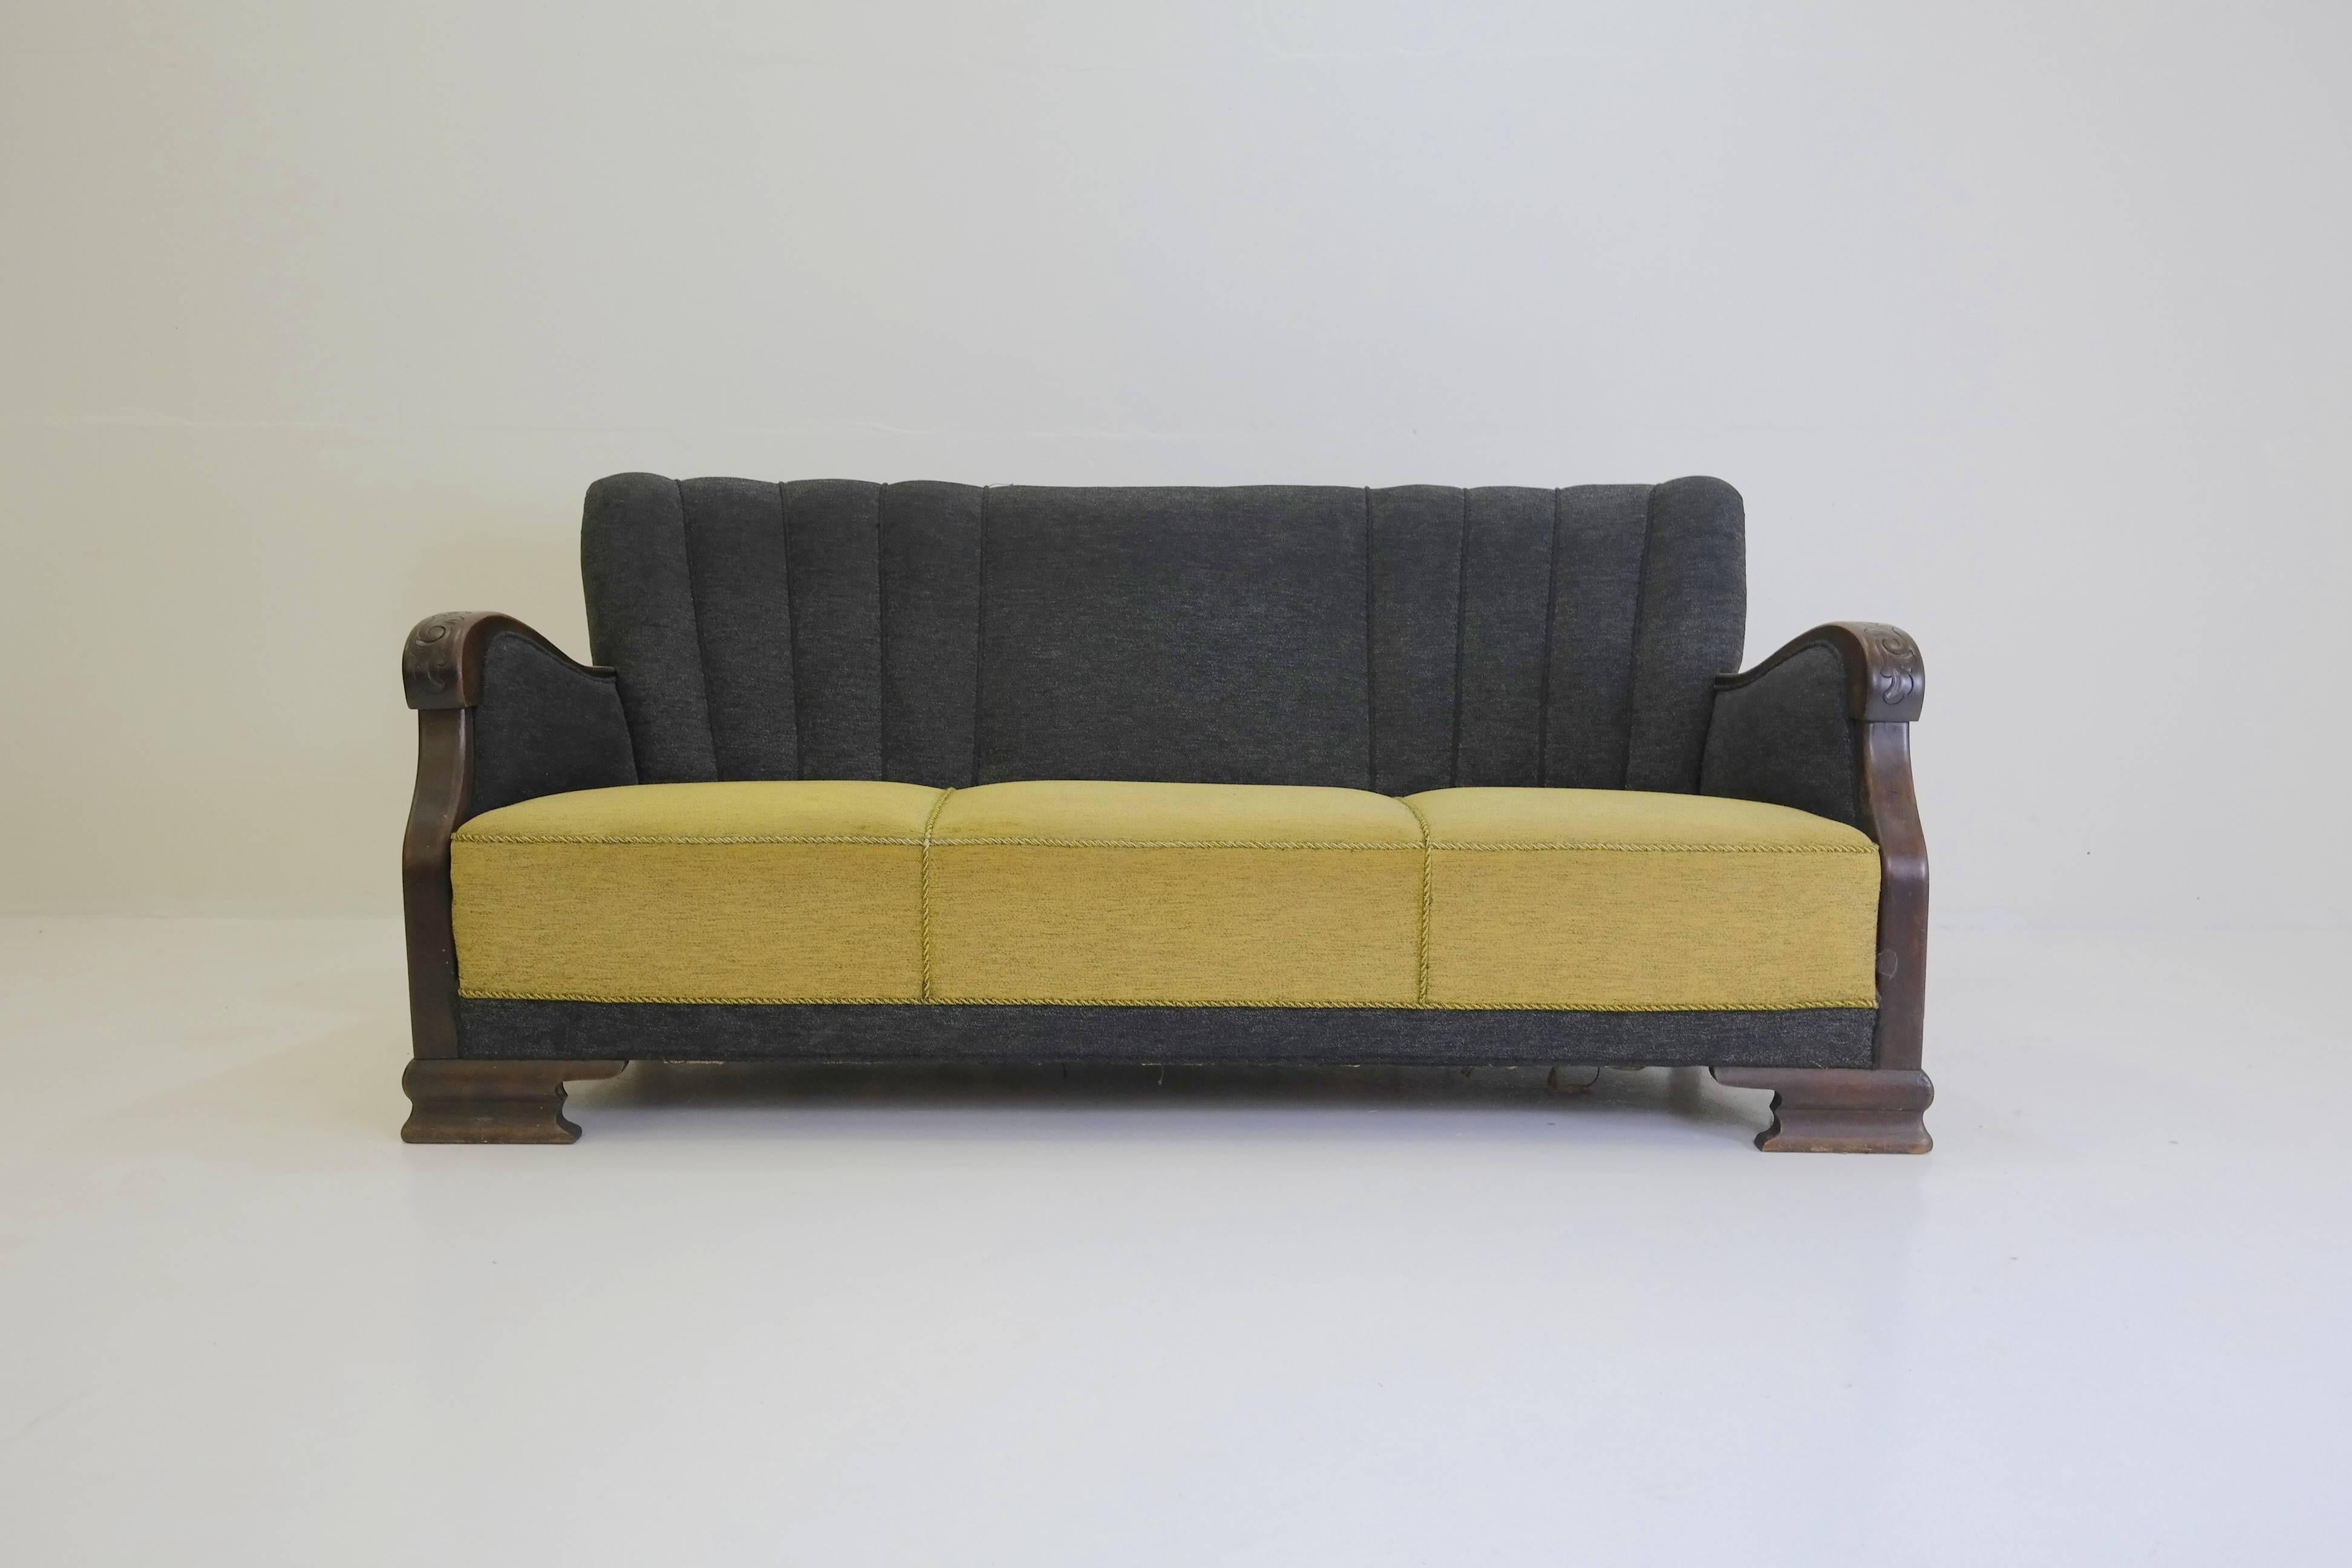 Super stylish 1930s Danish sofa. Still in its original two-tone fabric and with all its old-world charm. The feet and armrest are carved walnut, with a sturdy beechwood frame. This is a very hard to find Danish original, and it would make quite a